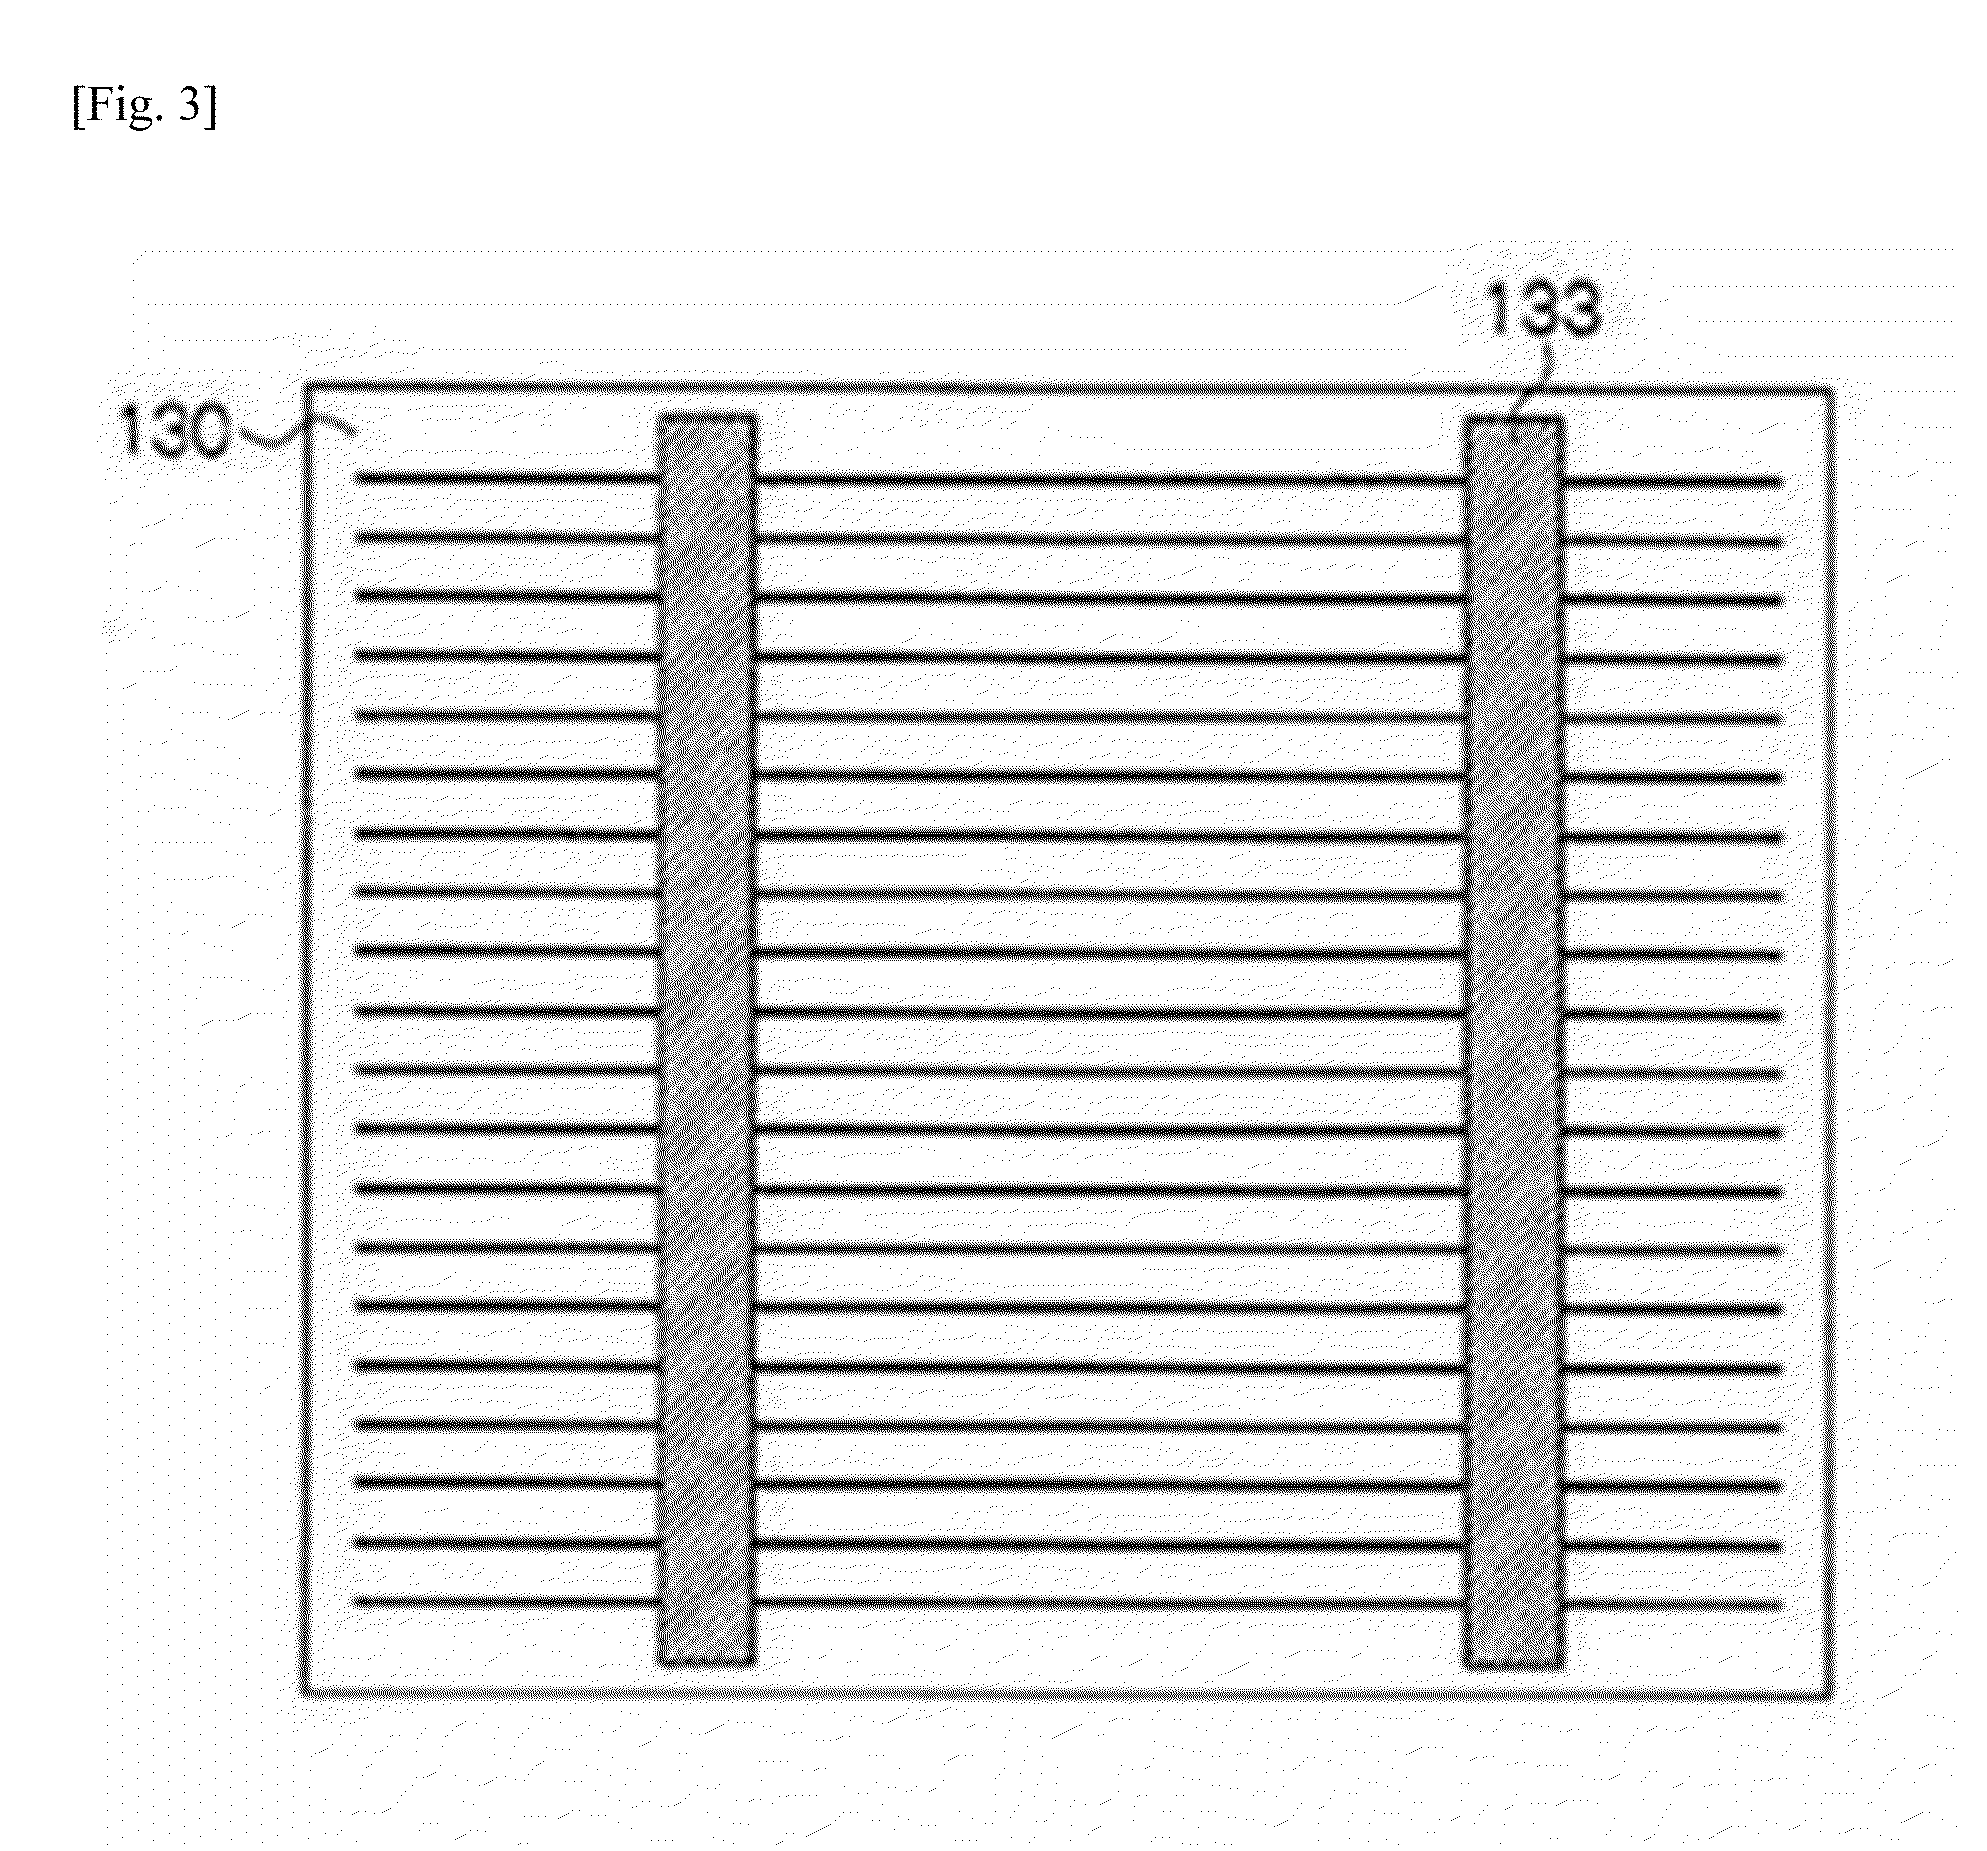 Solder bonded body, method of producing solder bonded body, element, photovoltaic cell, method of producing element and method of producing photovoltaic cell